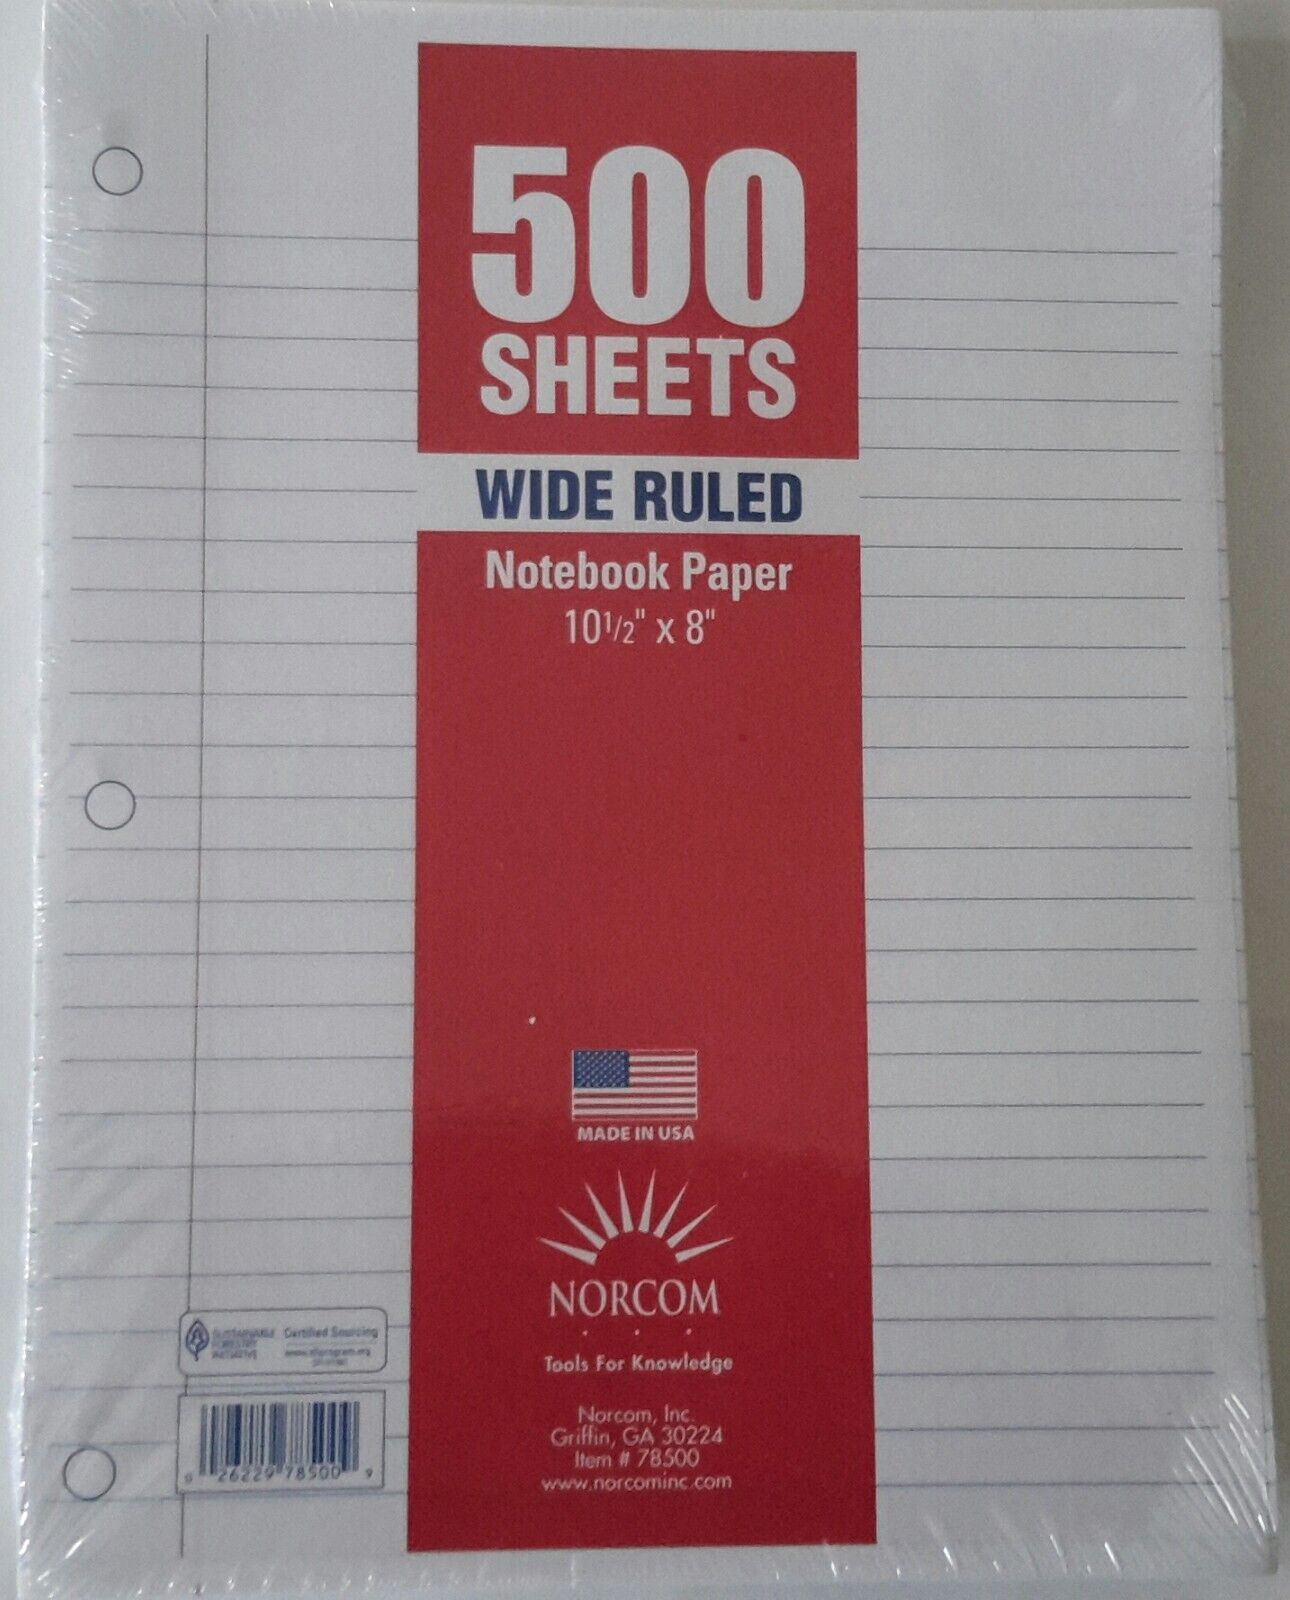 Norcom Wide Ruled Notebook Paper 500 Sheets ~ 10.5 x 8 Sealed in Original Wrap